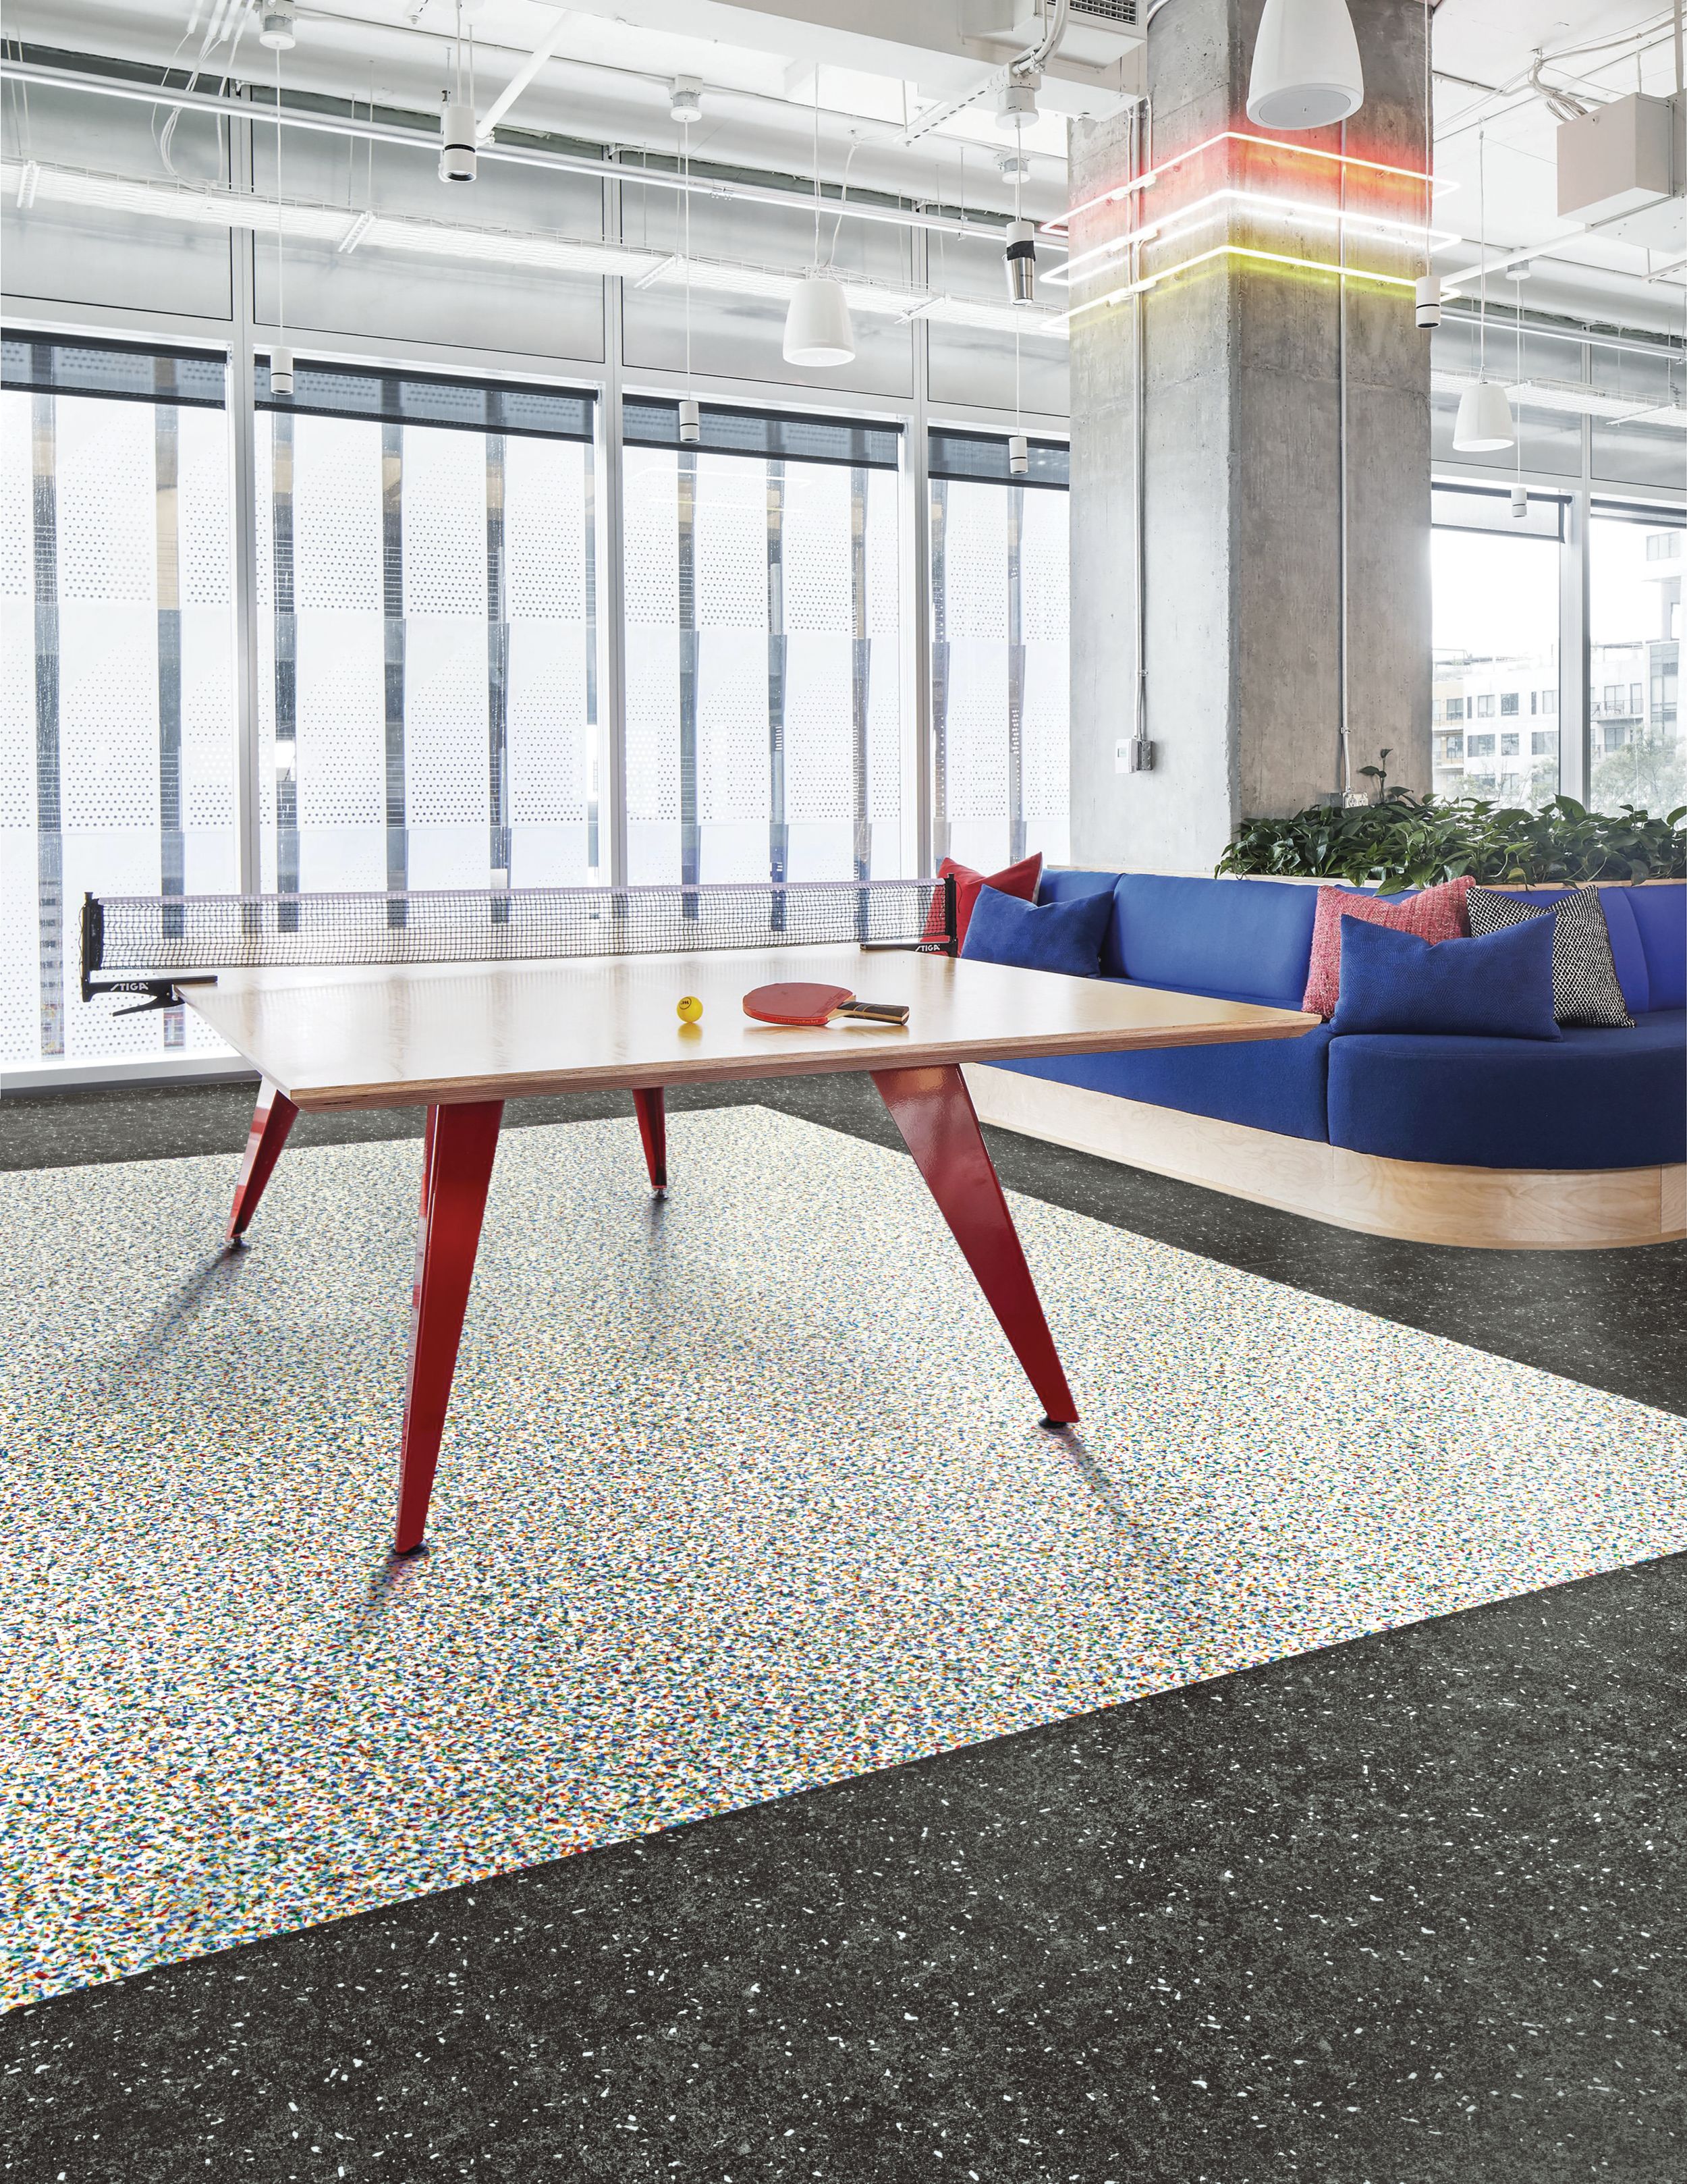 Interface Walk on By, Polychrome and Walk the Aisle LVT in a lobby space imagen número 2